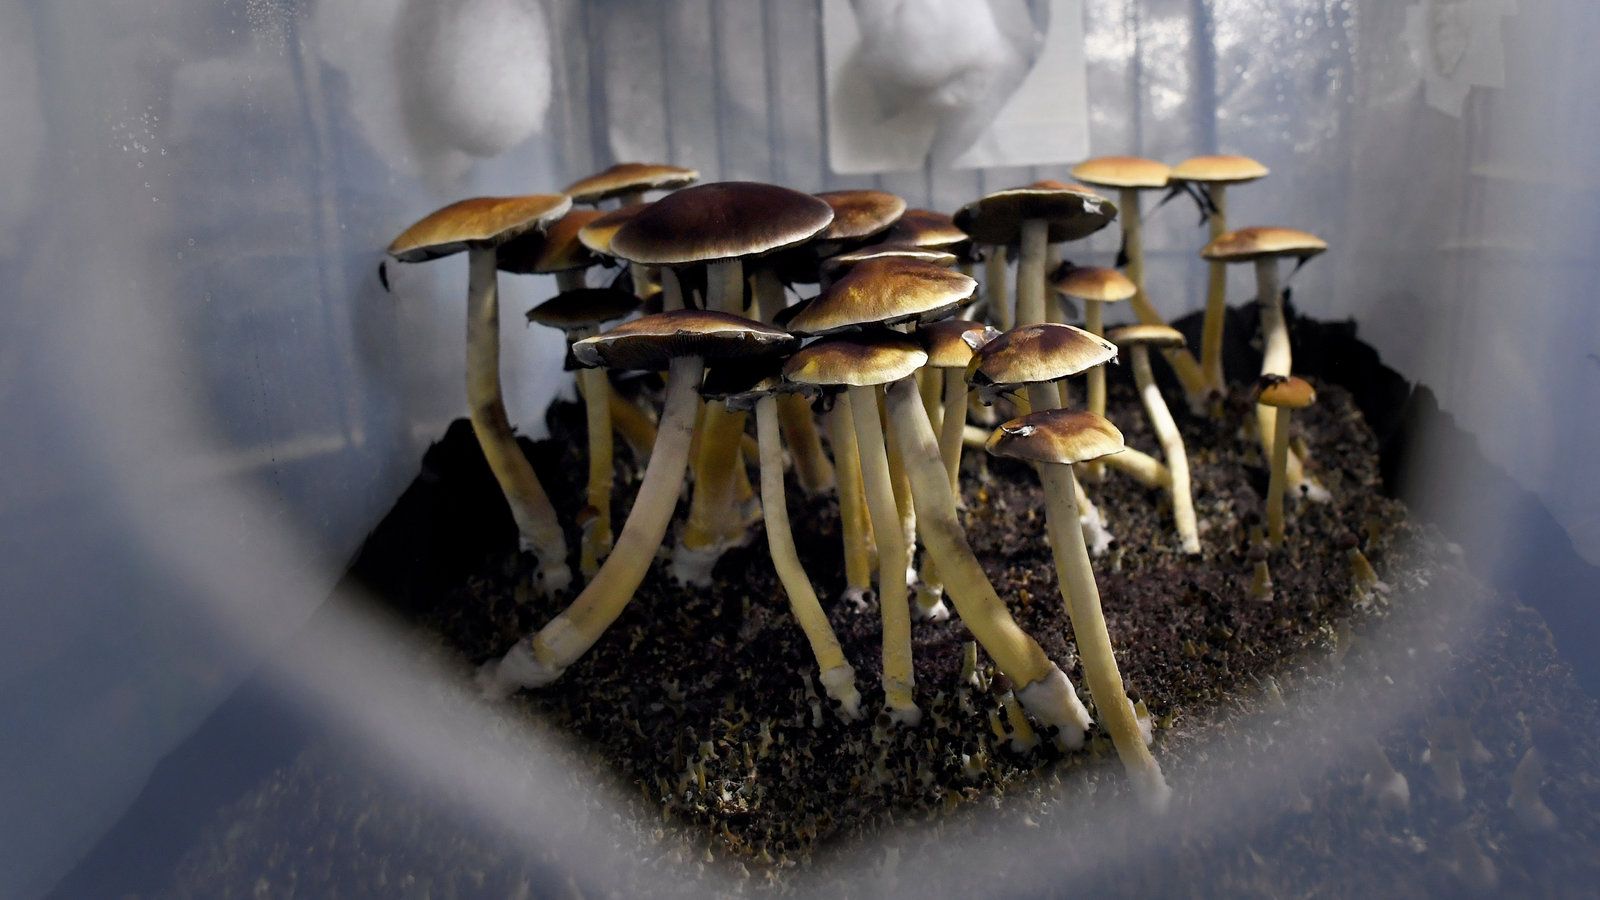 Johns Hopkins Opens New Center for Psychedelic Research